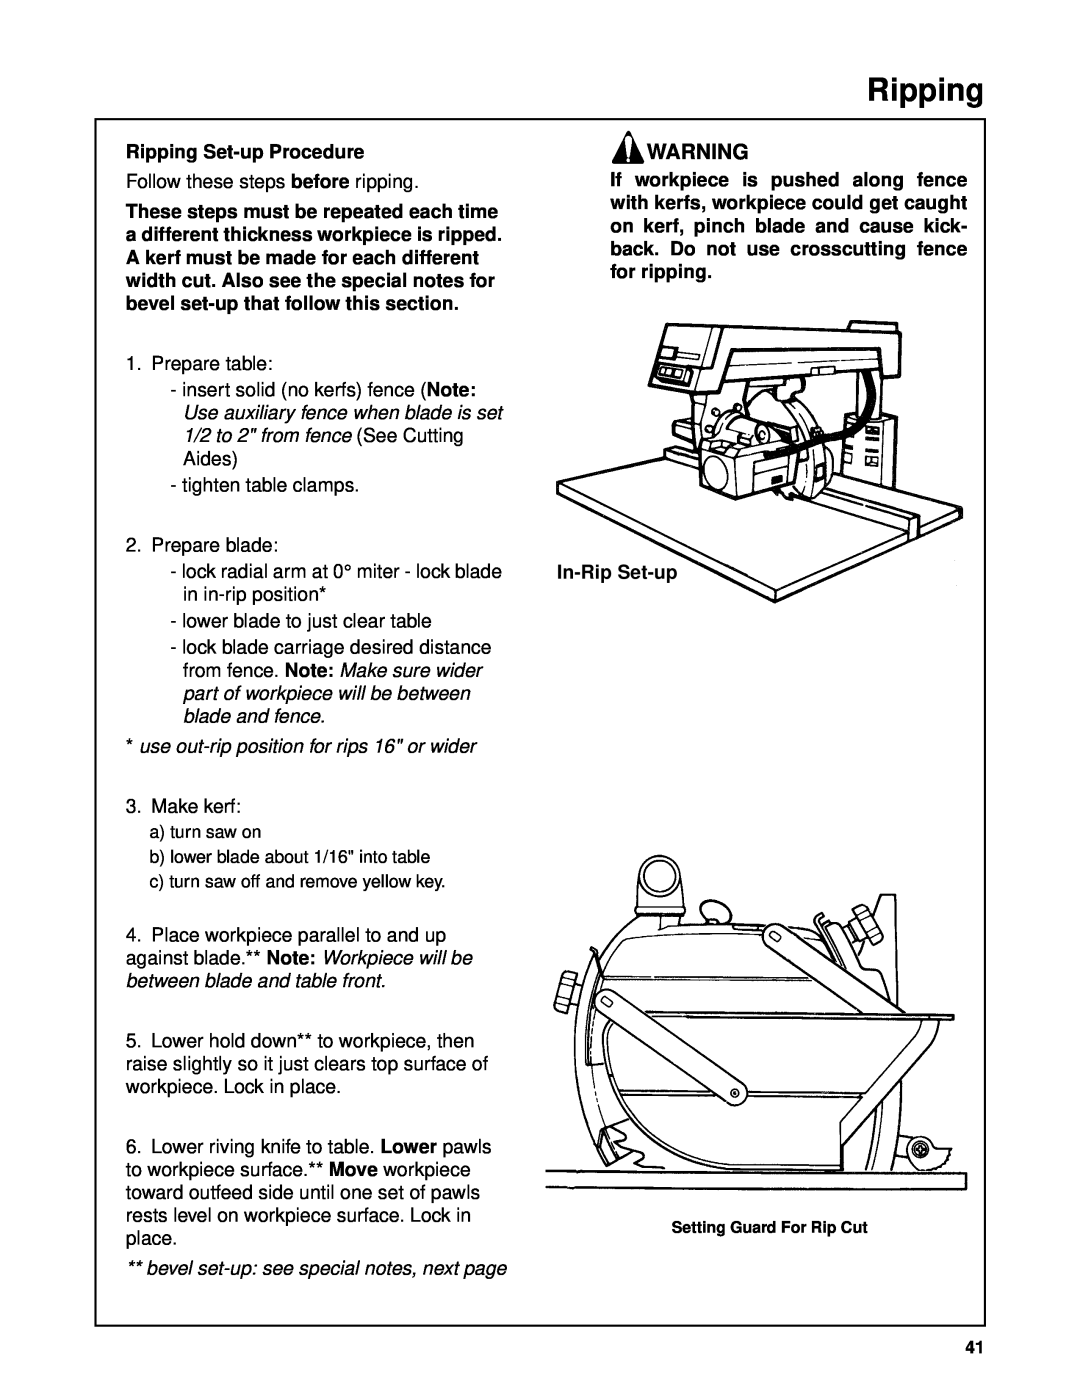 Craftsman 509398, 509399 owner manual Ripping Set-up Procedure, use out-rip position for rips 16 or wider, In-Rip Set-up 